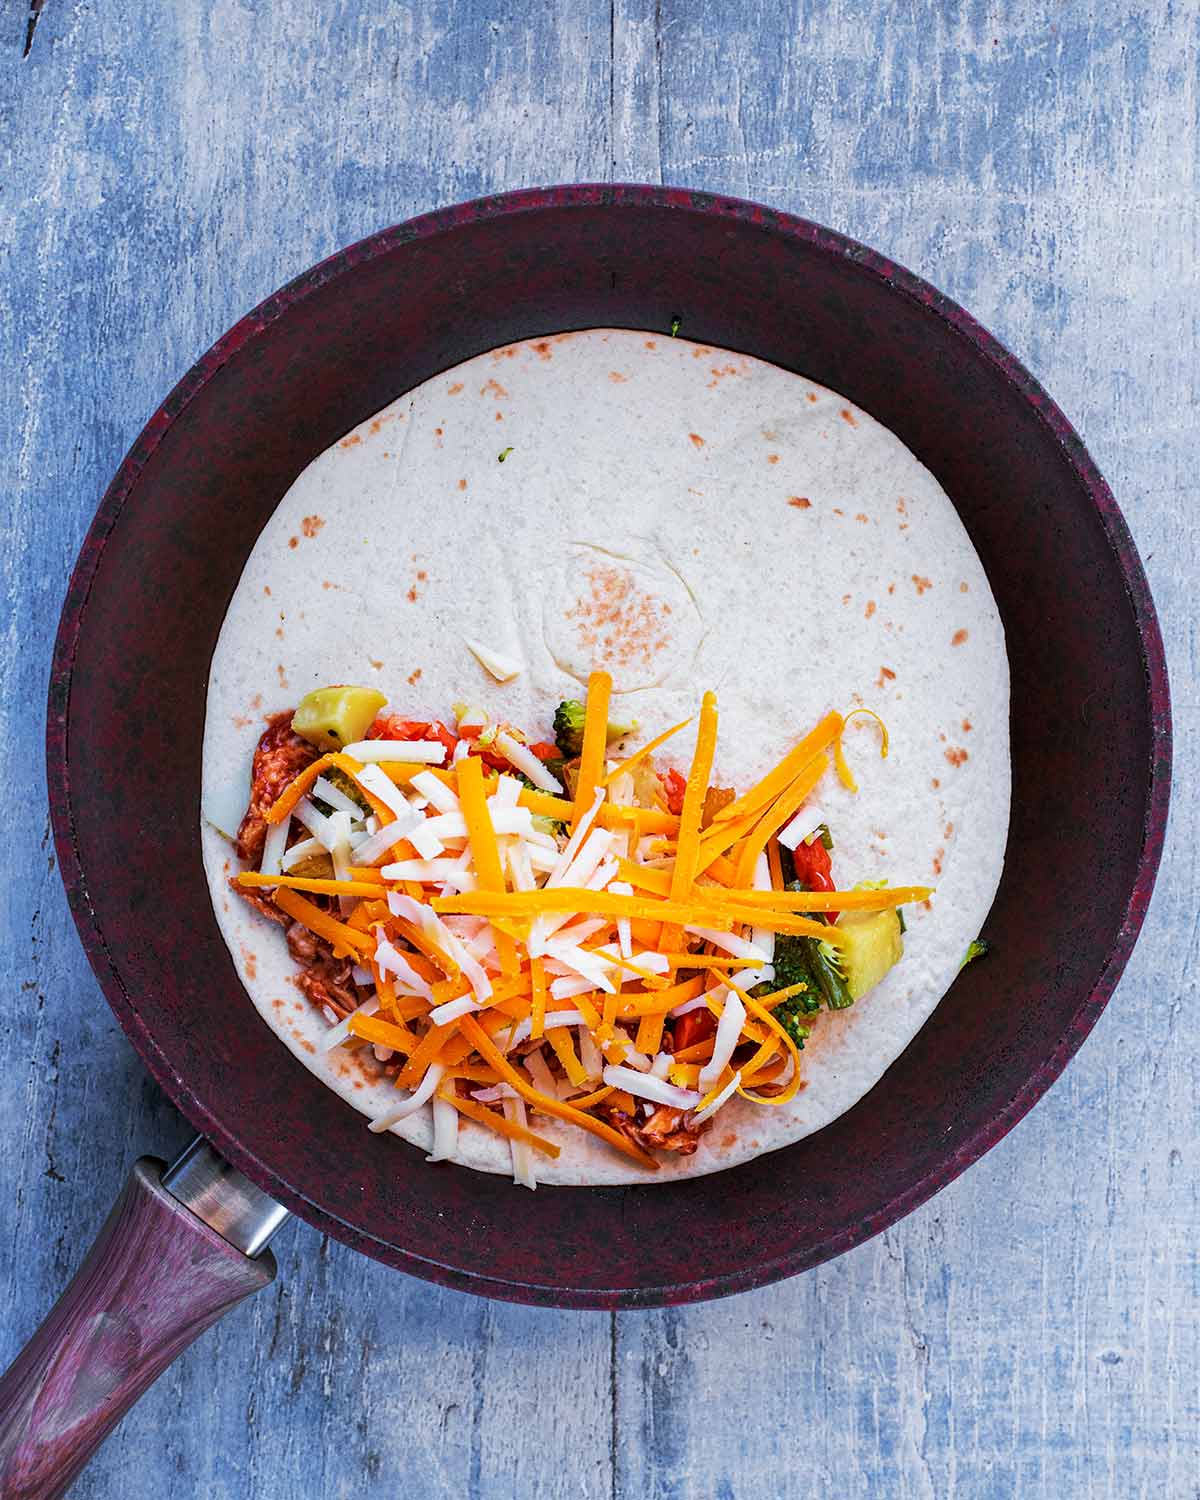 A flour tortilla in a frying pan with barbecue chicken, chopped vegetables and grated cheese on half of it.